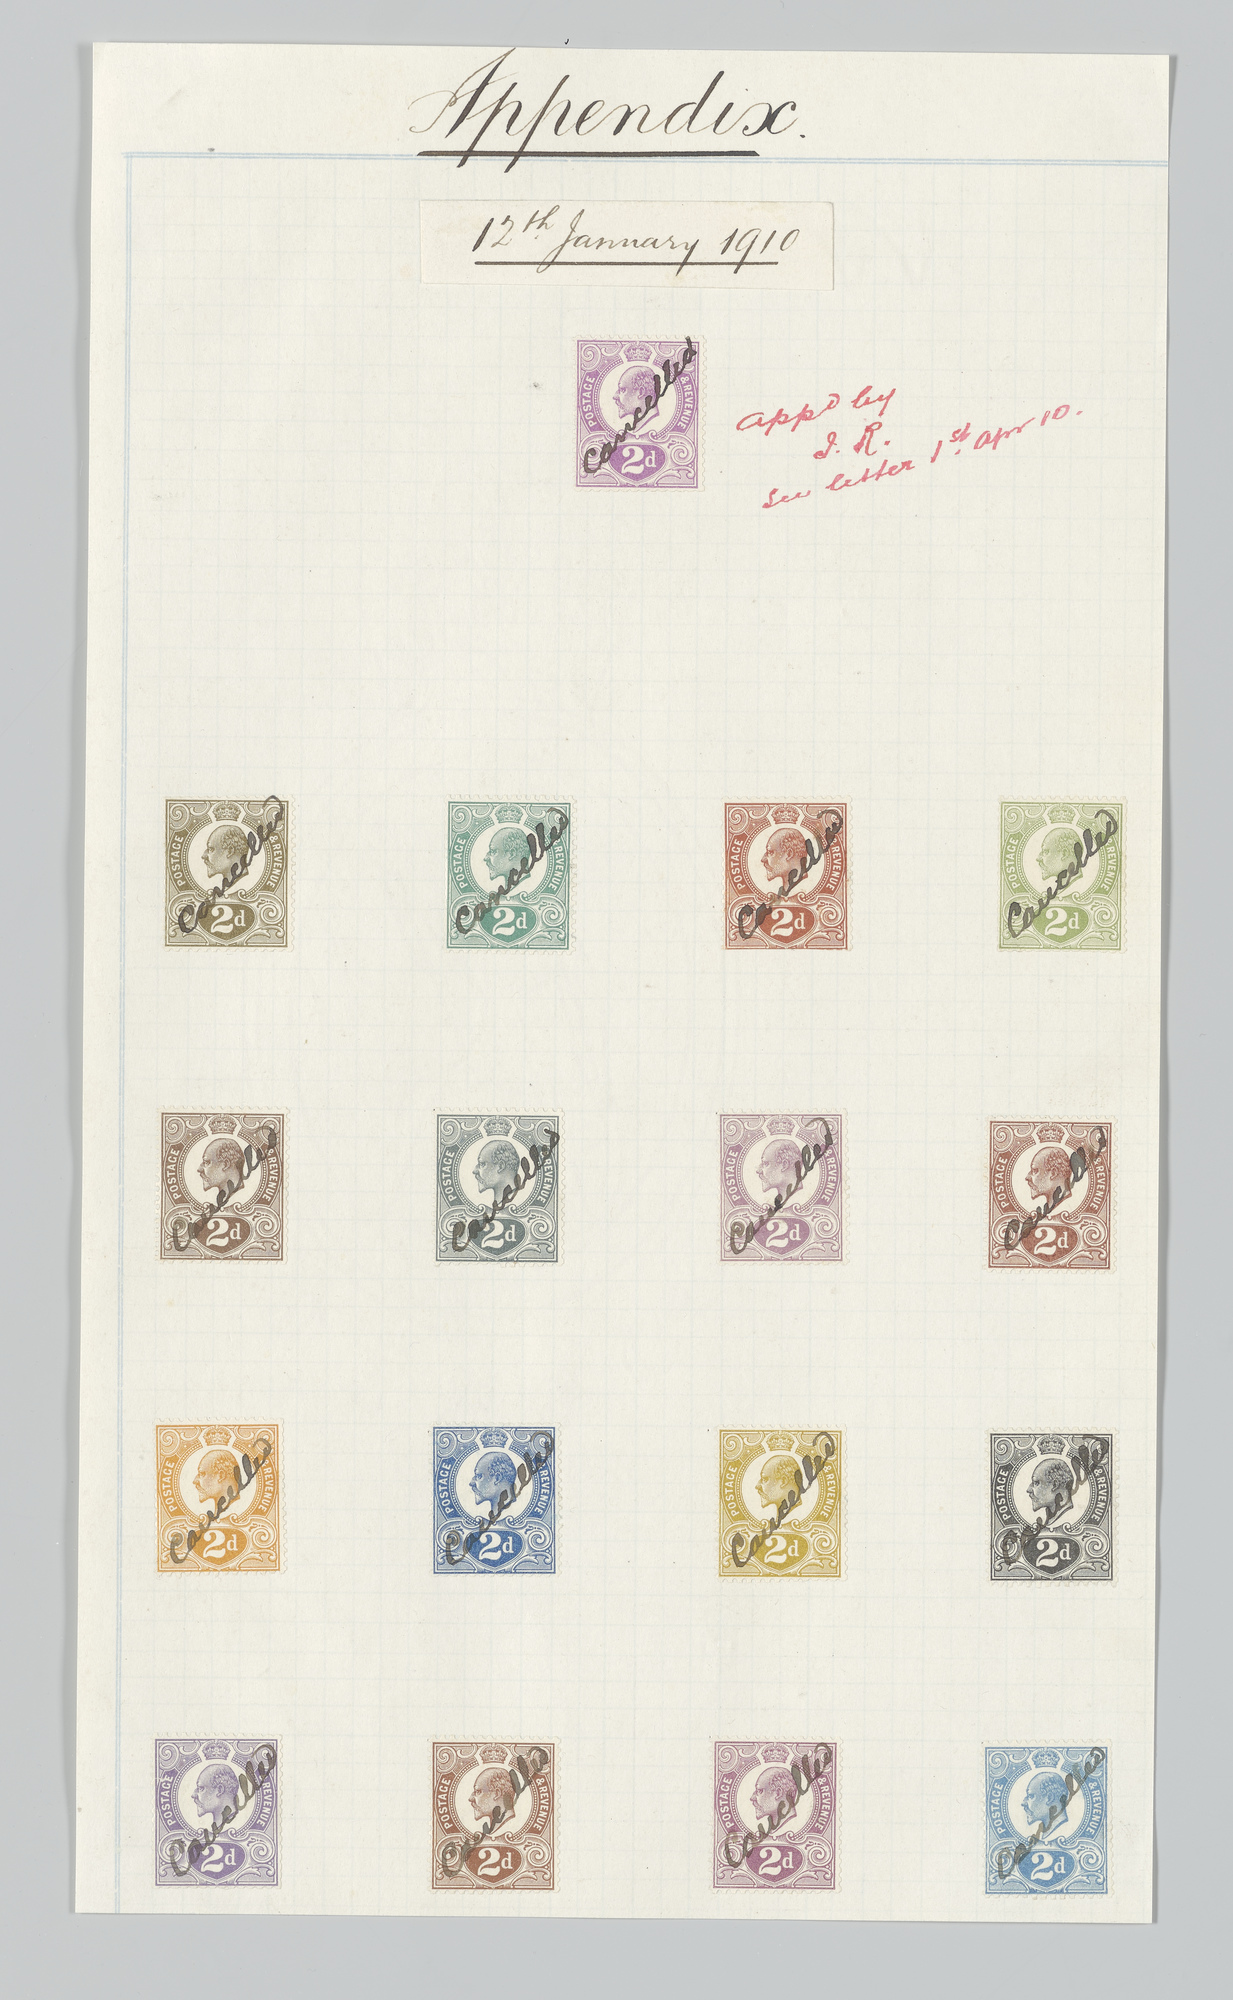 A cream sheet of paper, showing a grid of stamps printed in various colours.